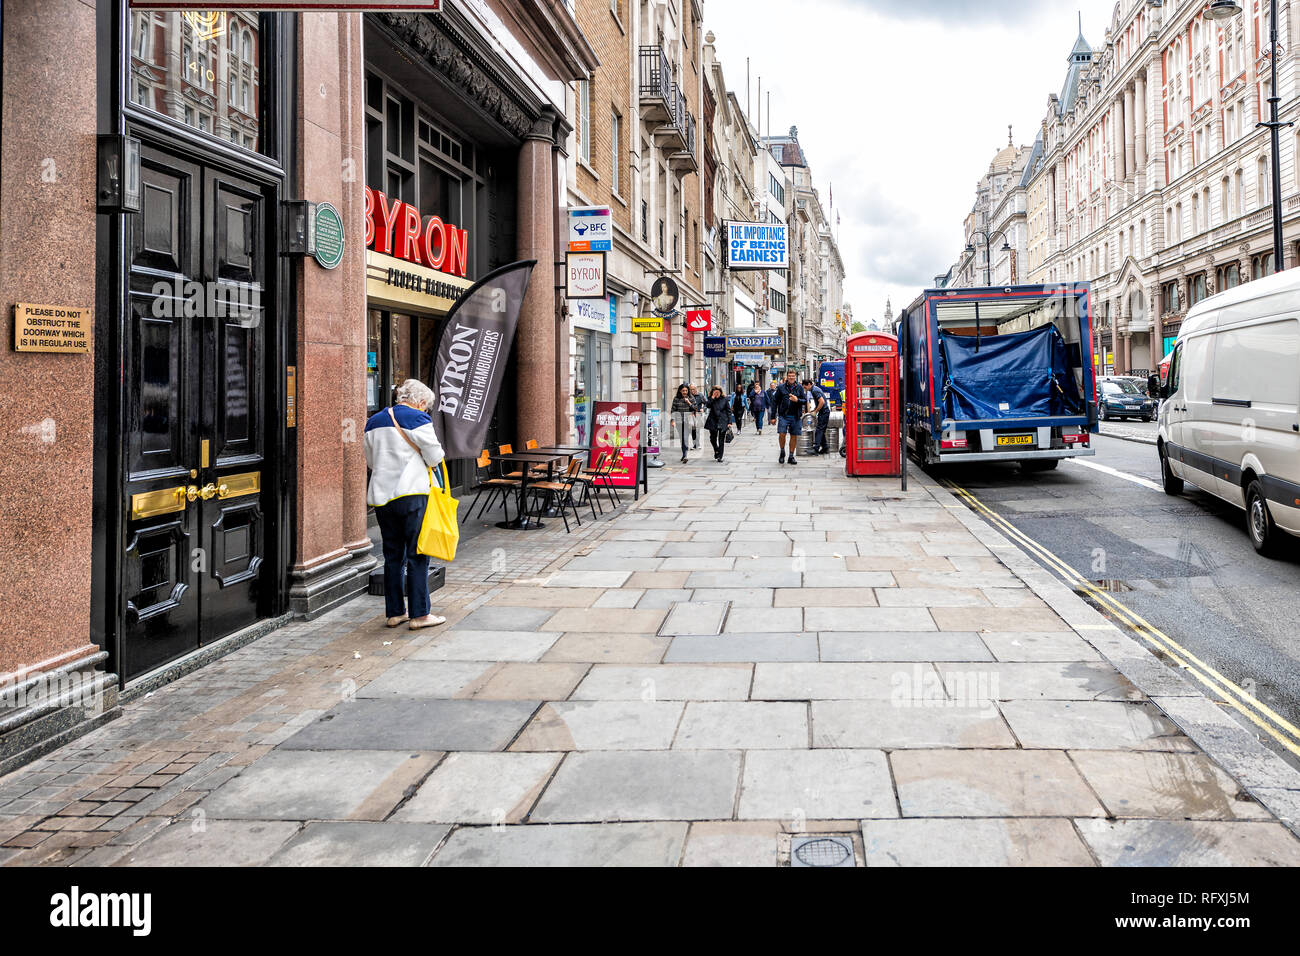 London, UK - September 12, 2018: People walking on street by road with Byron burgers hamburgers restaurant sign and sidewalk in the Strand in Covent G Stock Photo